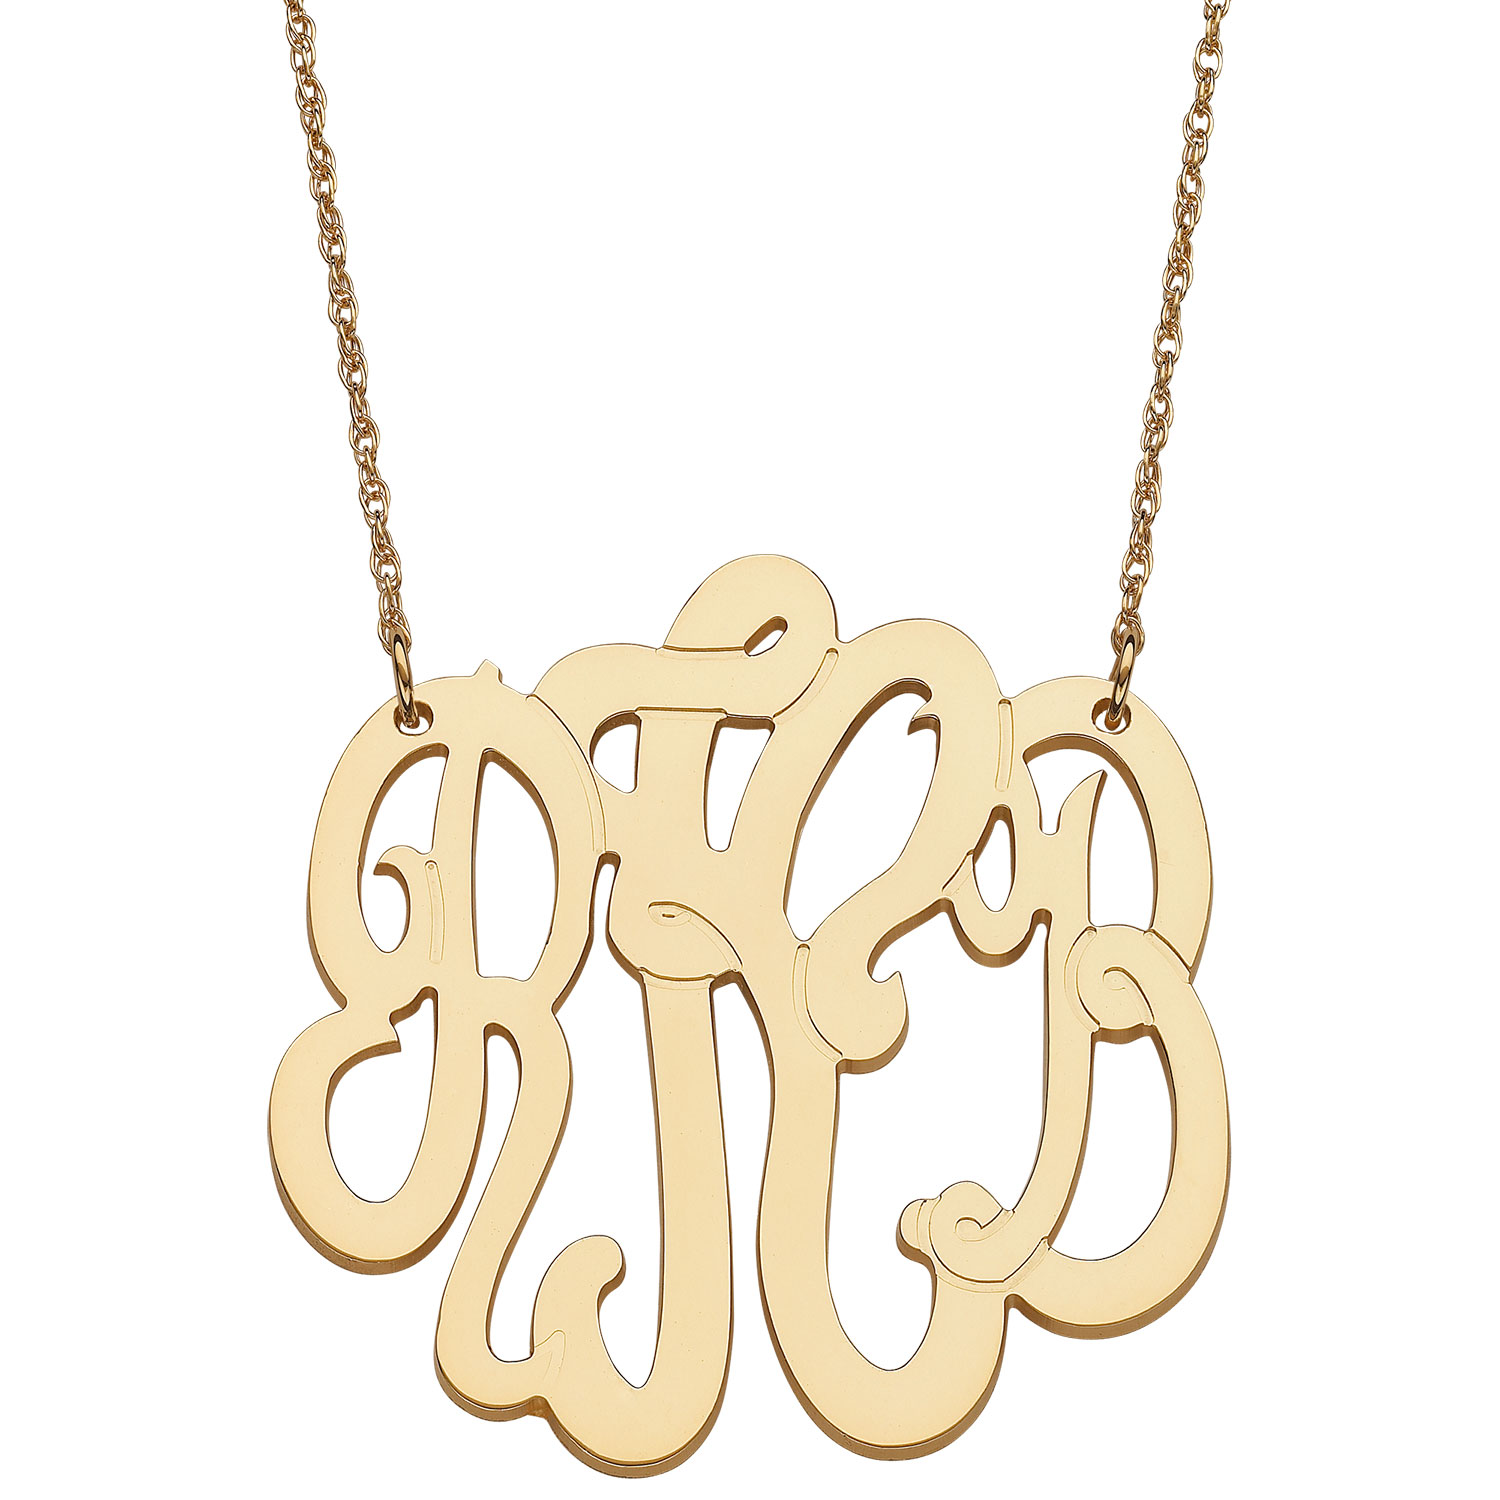 14K Yellow Gold 3- Initial Monogram Necklace - Large